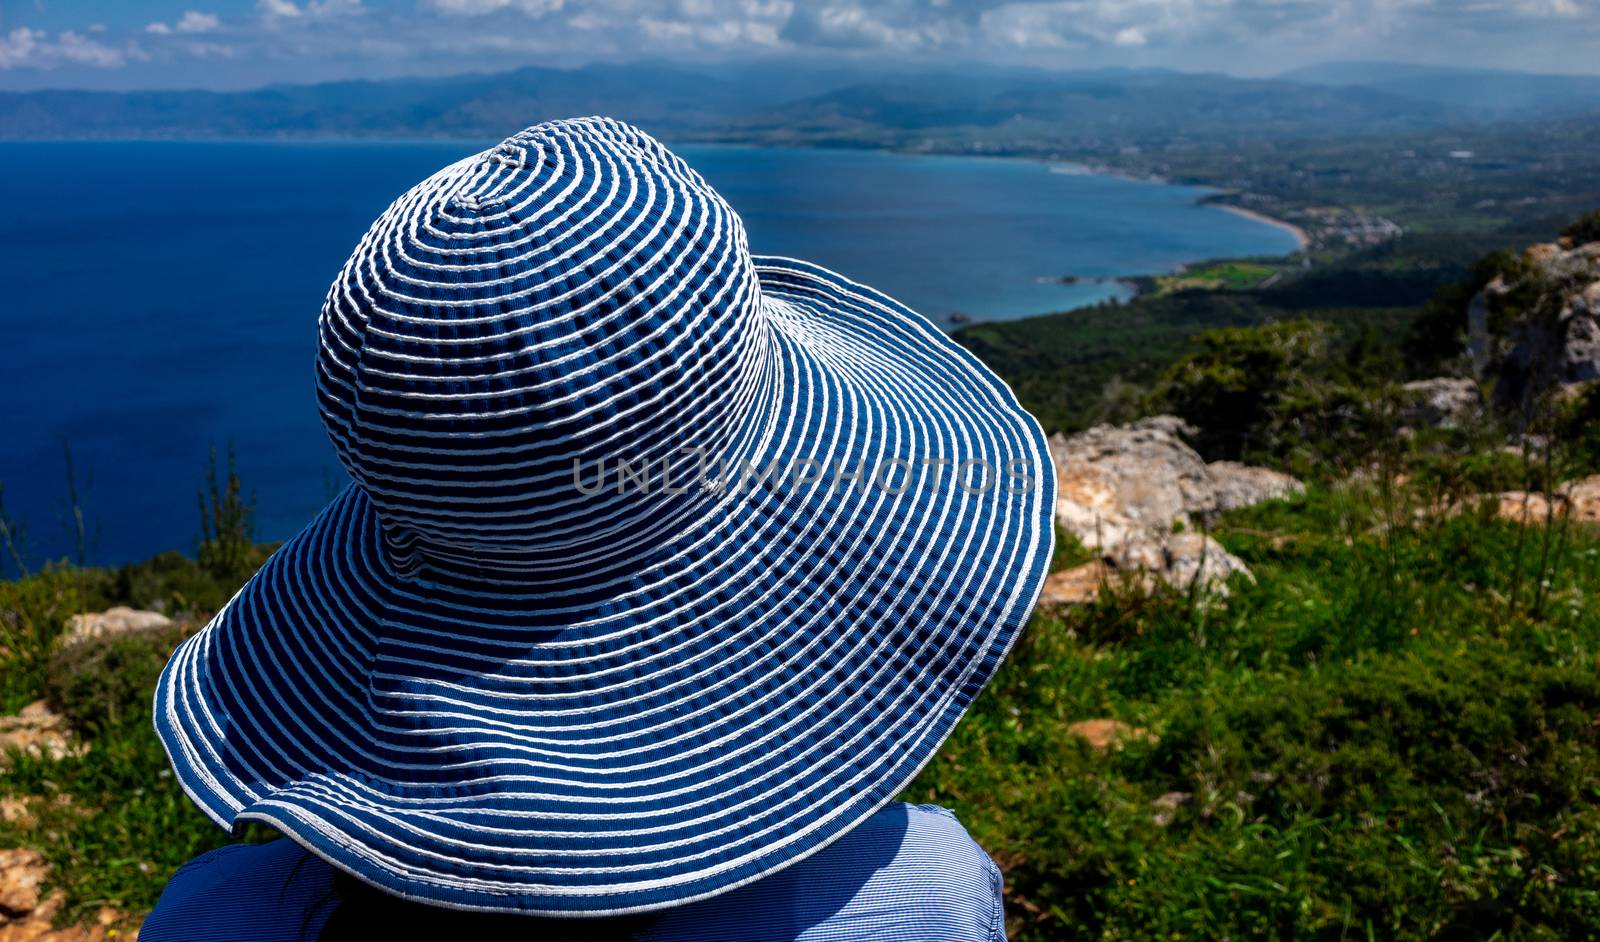 A girl in a wide-brimmed striped hat looks at the beautiful landscape of the coastline